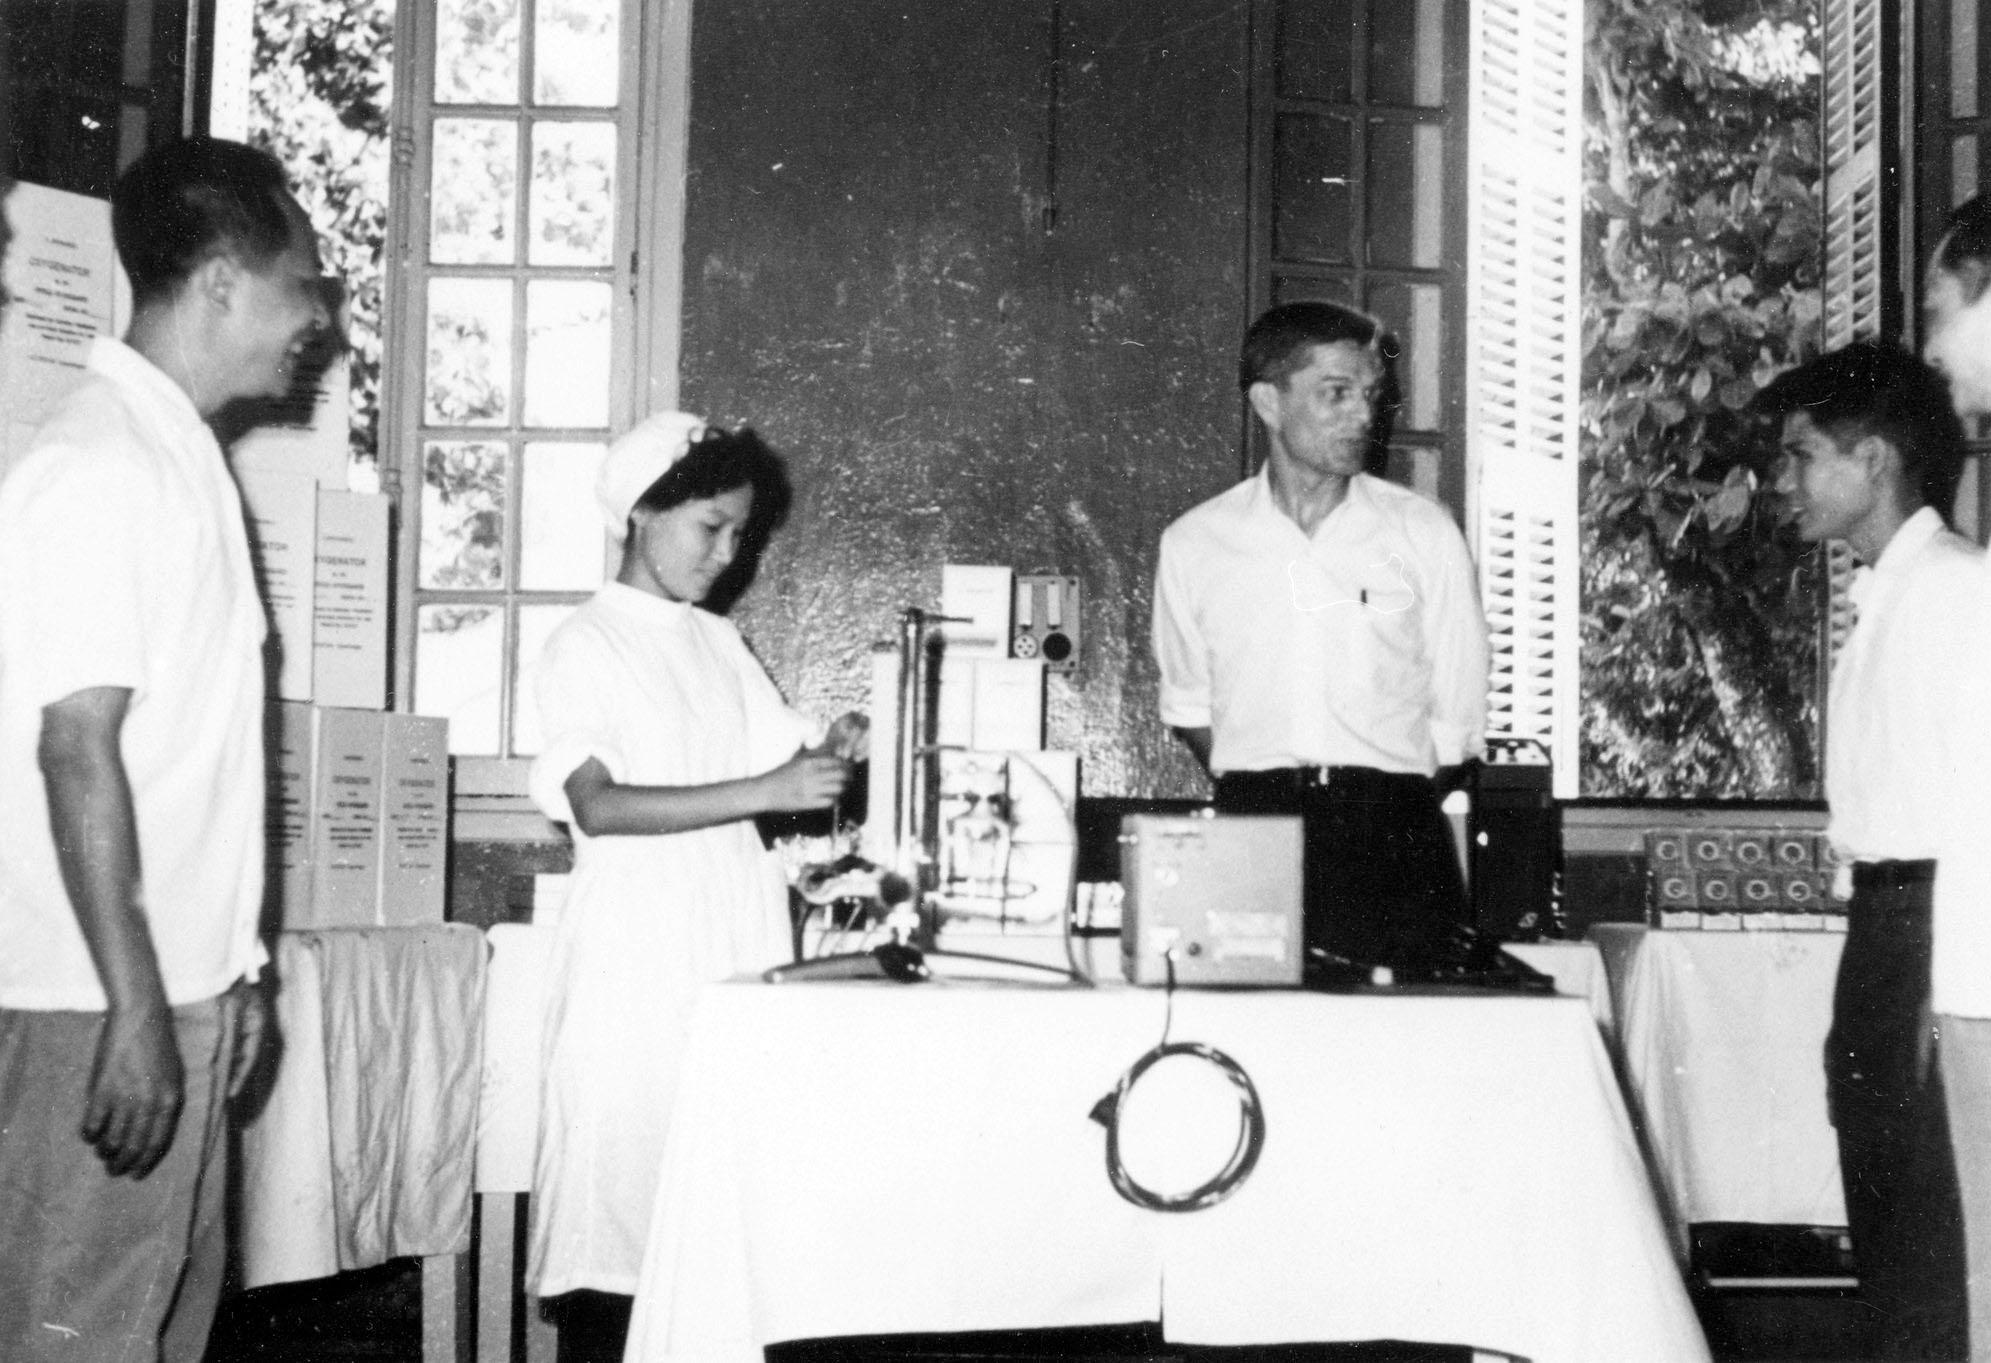 Four people standing around a table with medical equipment